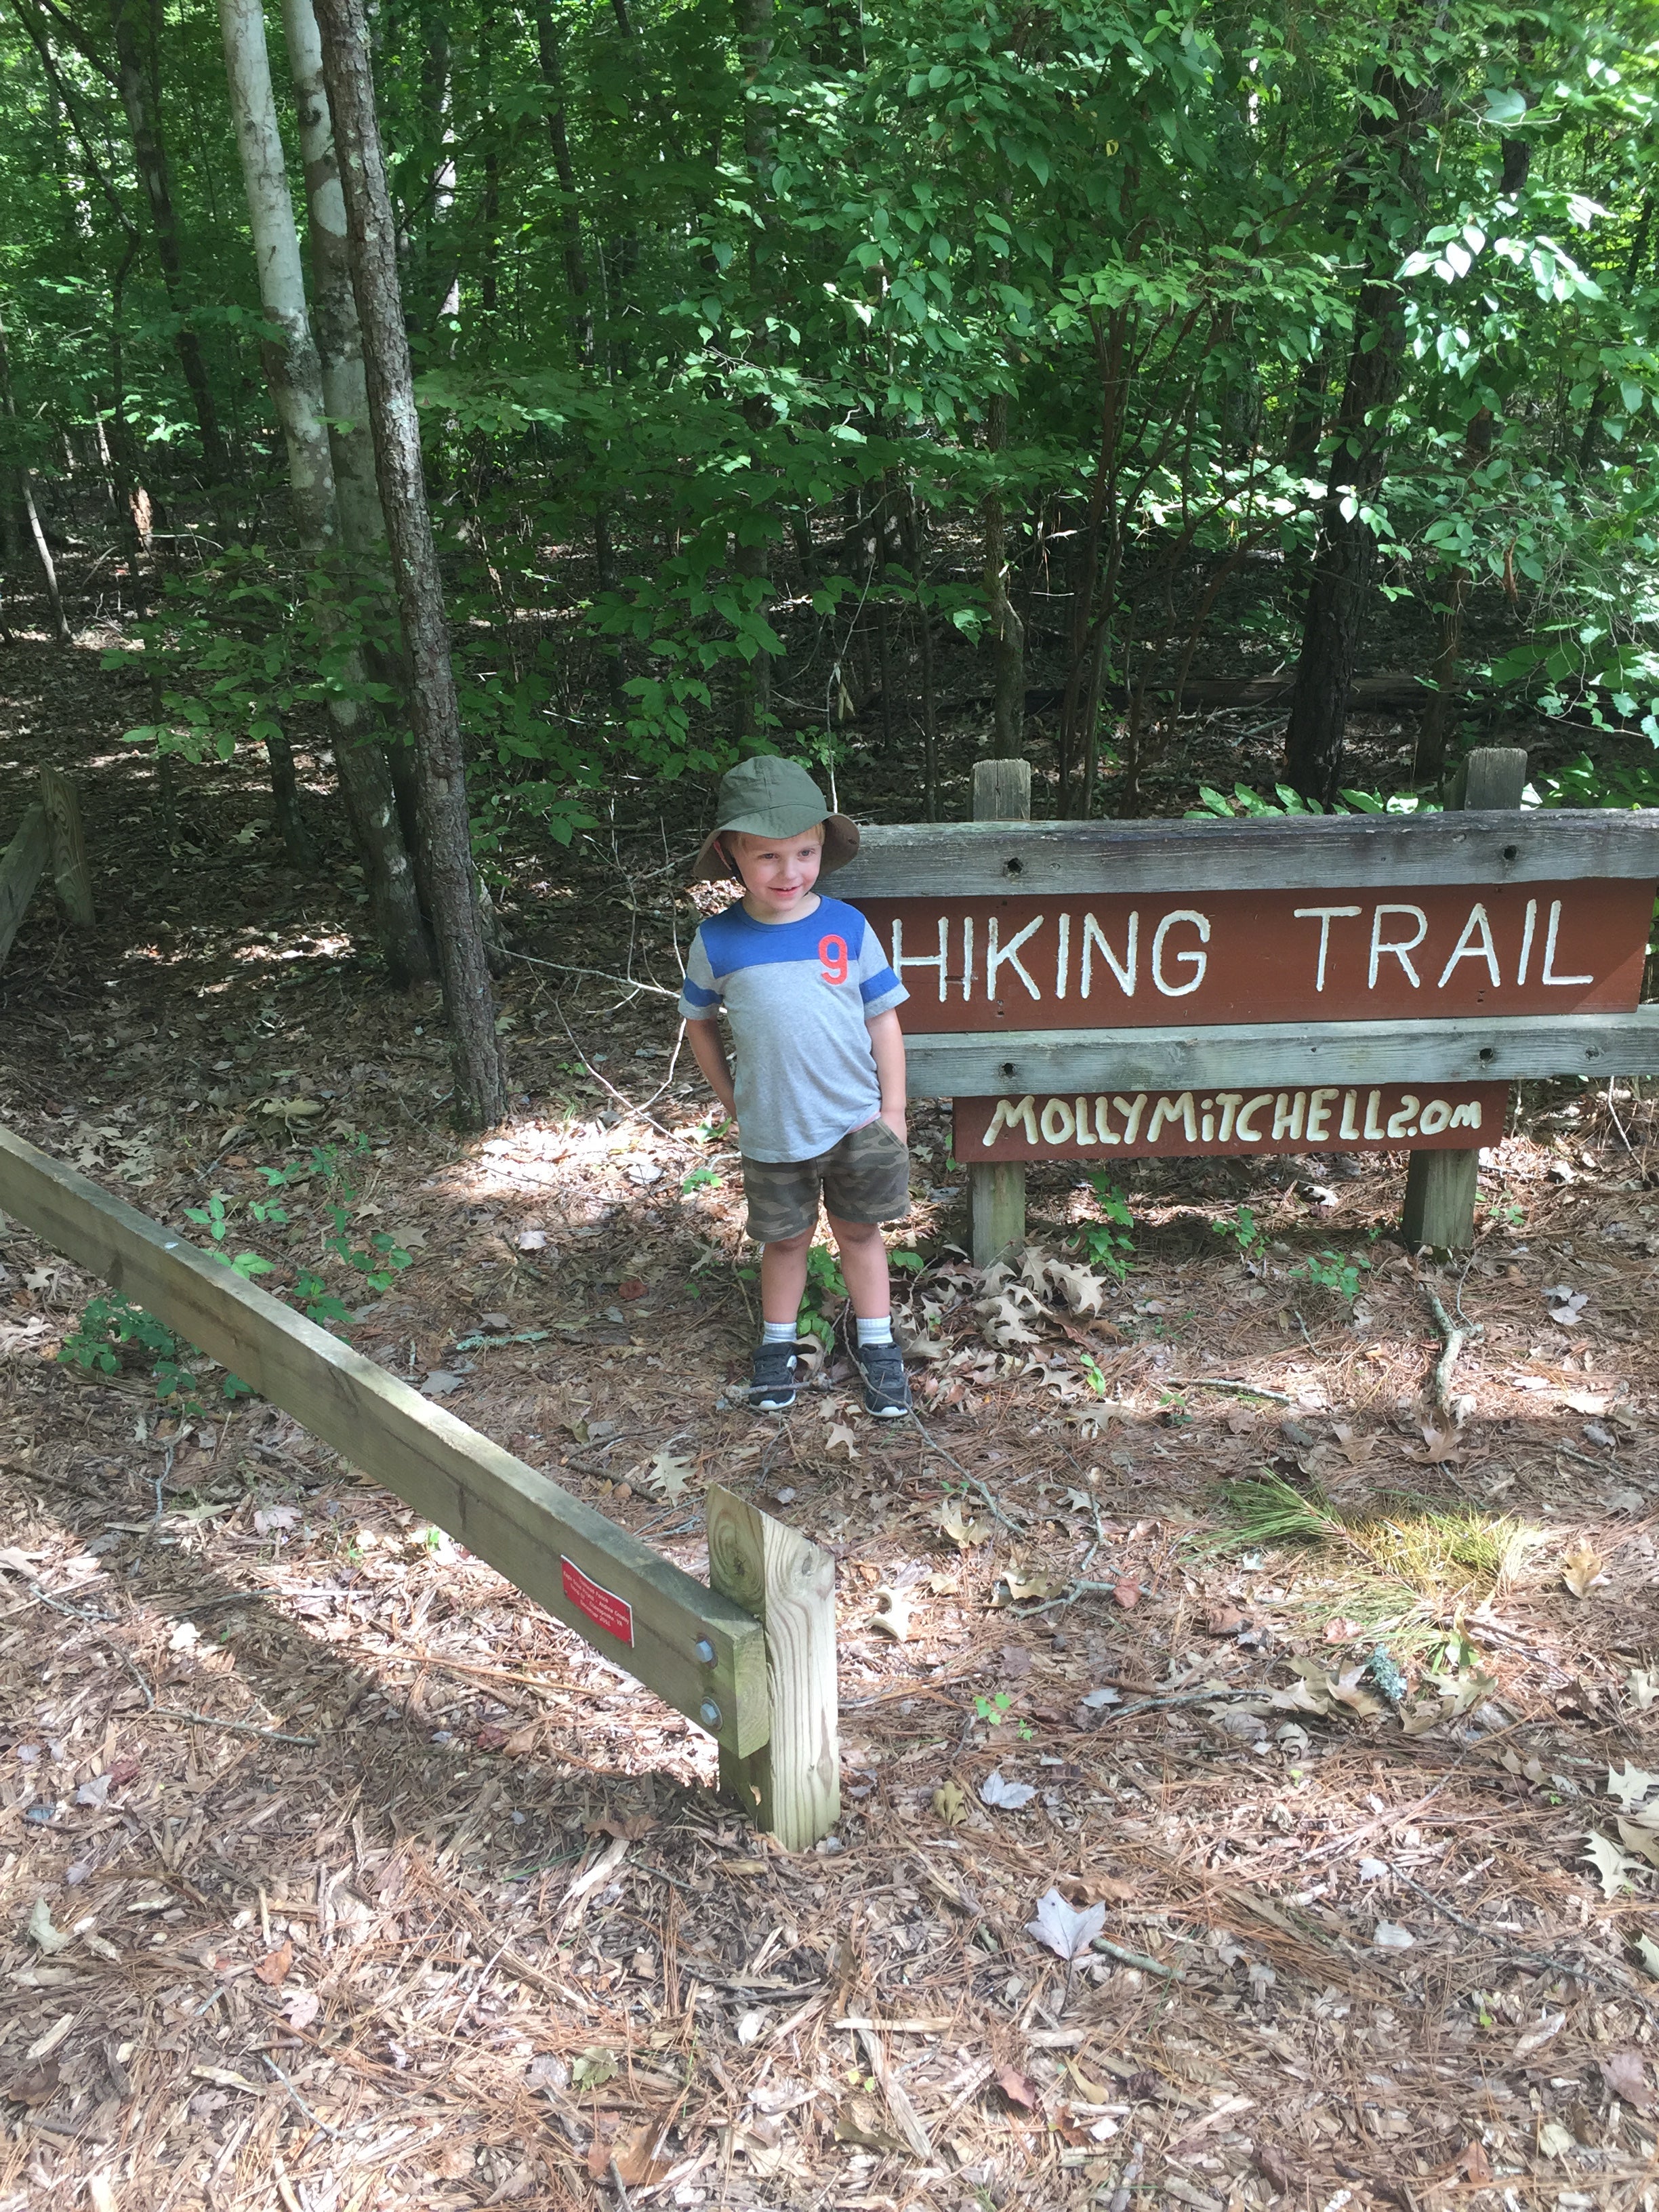 Tons of hiking trails!